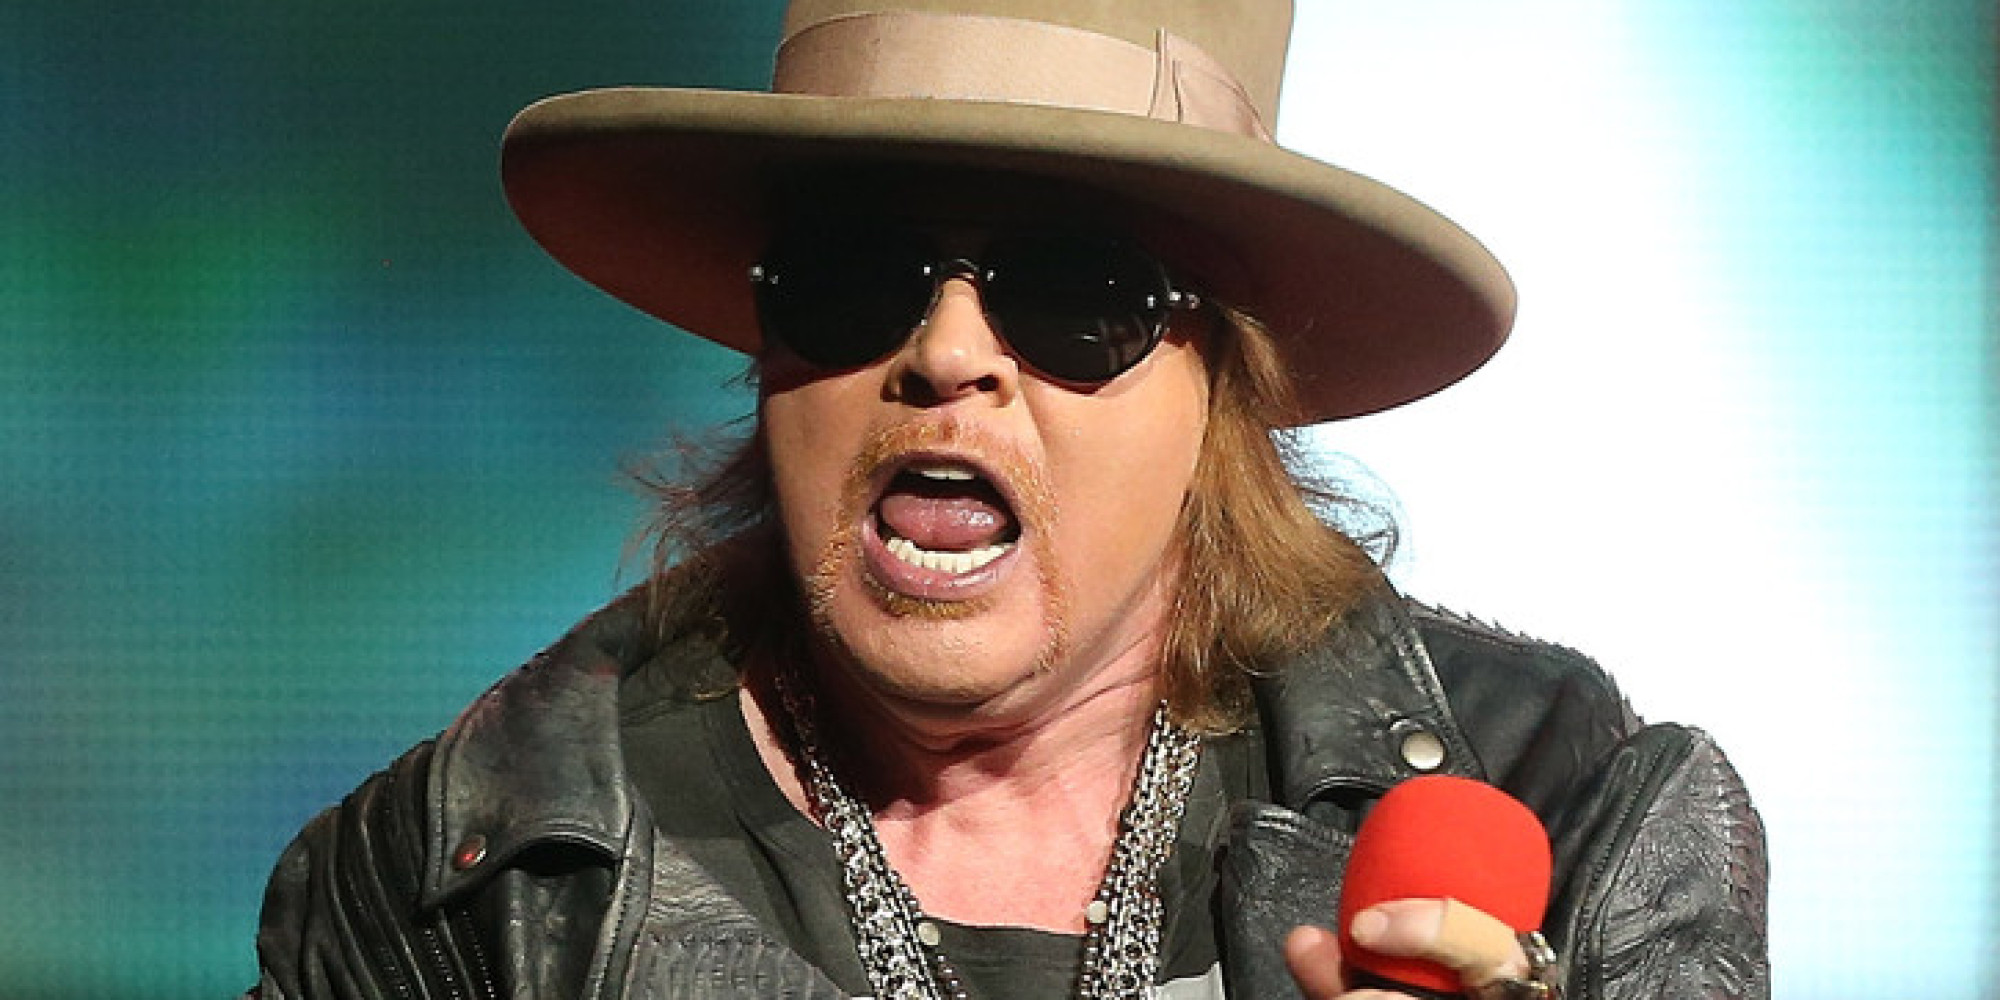 Axl Rose - "It's really hard to maintain a one-on-one relationship if the other person is not going to allow me to be with other people."